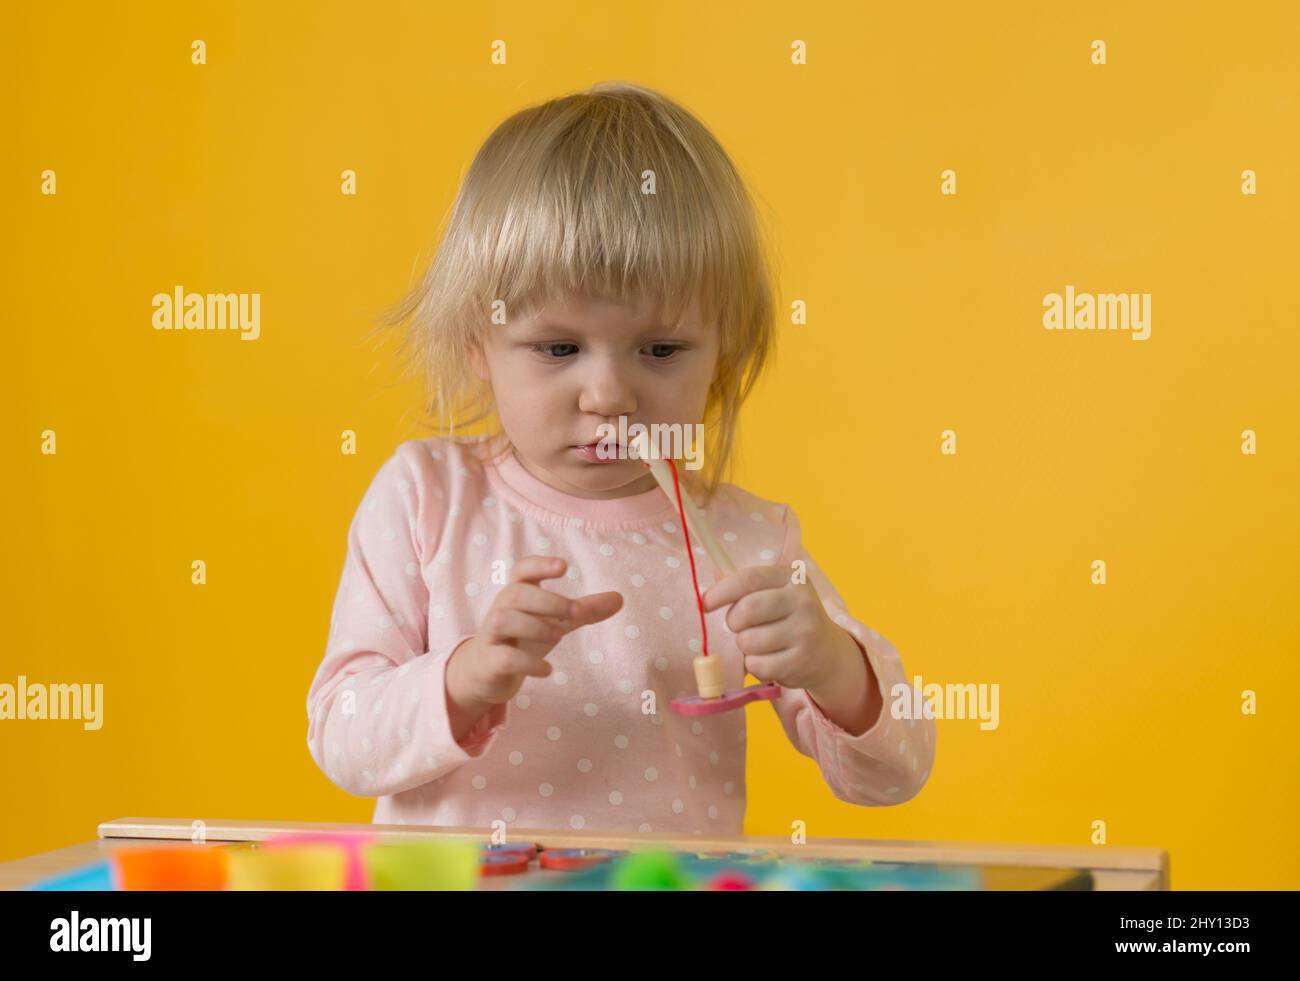 https://c8.alamy.com/comp/2HY13D3/a-girl-in-pink-pajamas-against-a-yellow-wall-enthusiastically-plays-a-magnetic-fishing-toy-with-a-wooden-fishing-rod-development-of-motor-skills-att-2HY13D3.jpg